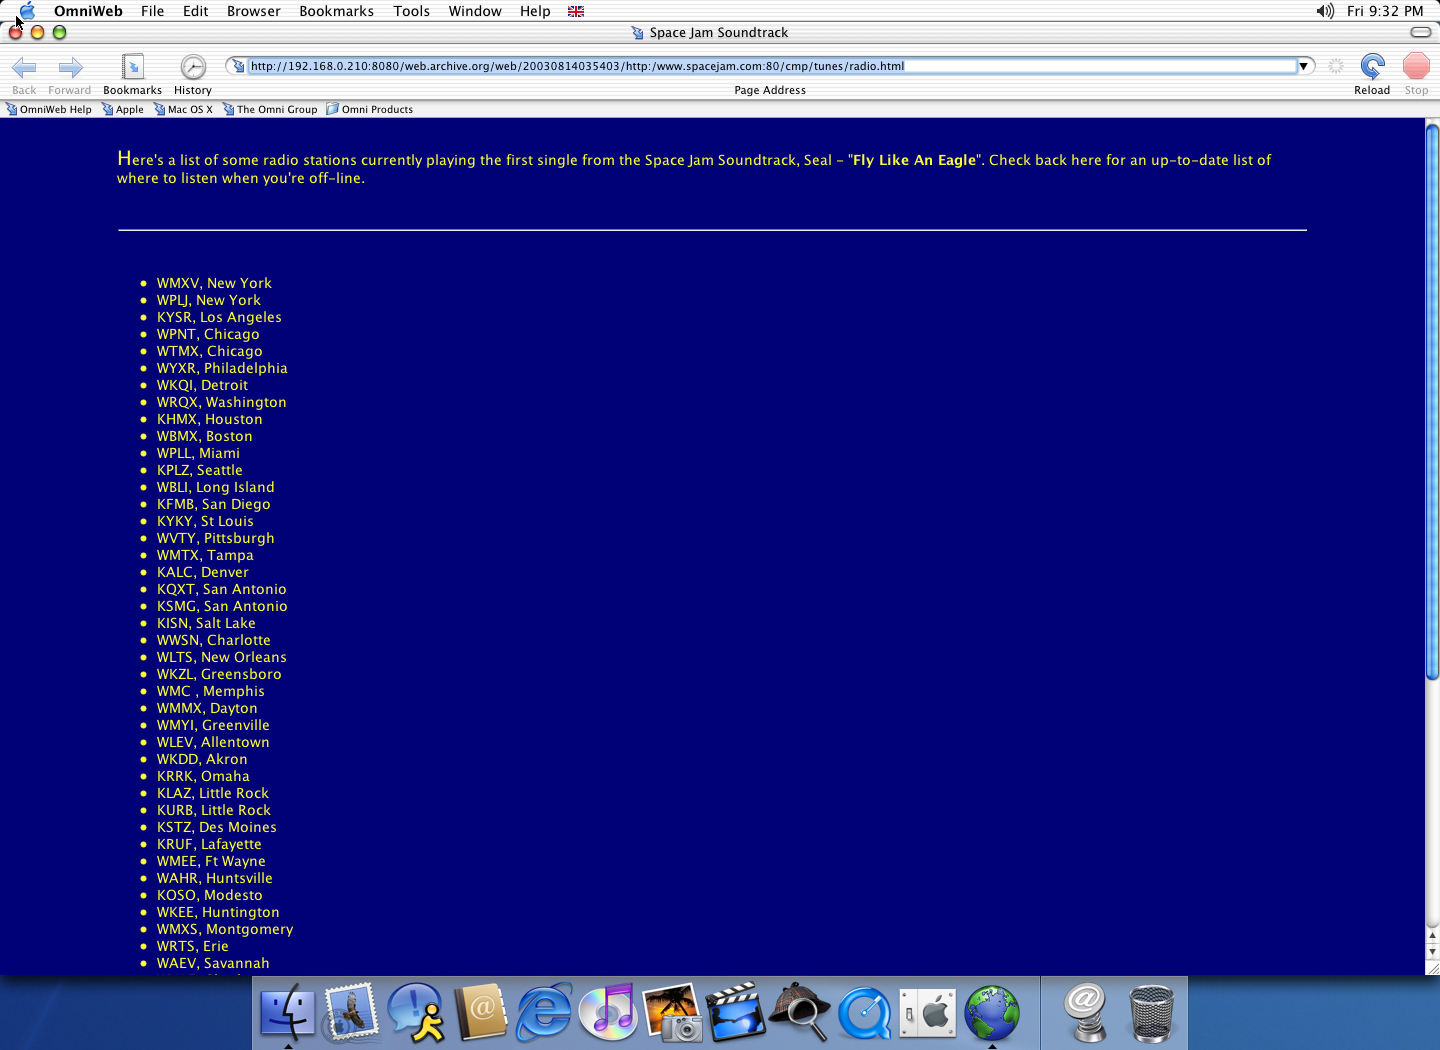 OS X 10.2 PPC with Omniweb 4.5 displaying a page from Space Jam archived at August 14, 2003 at 03:54:03